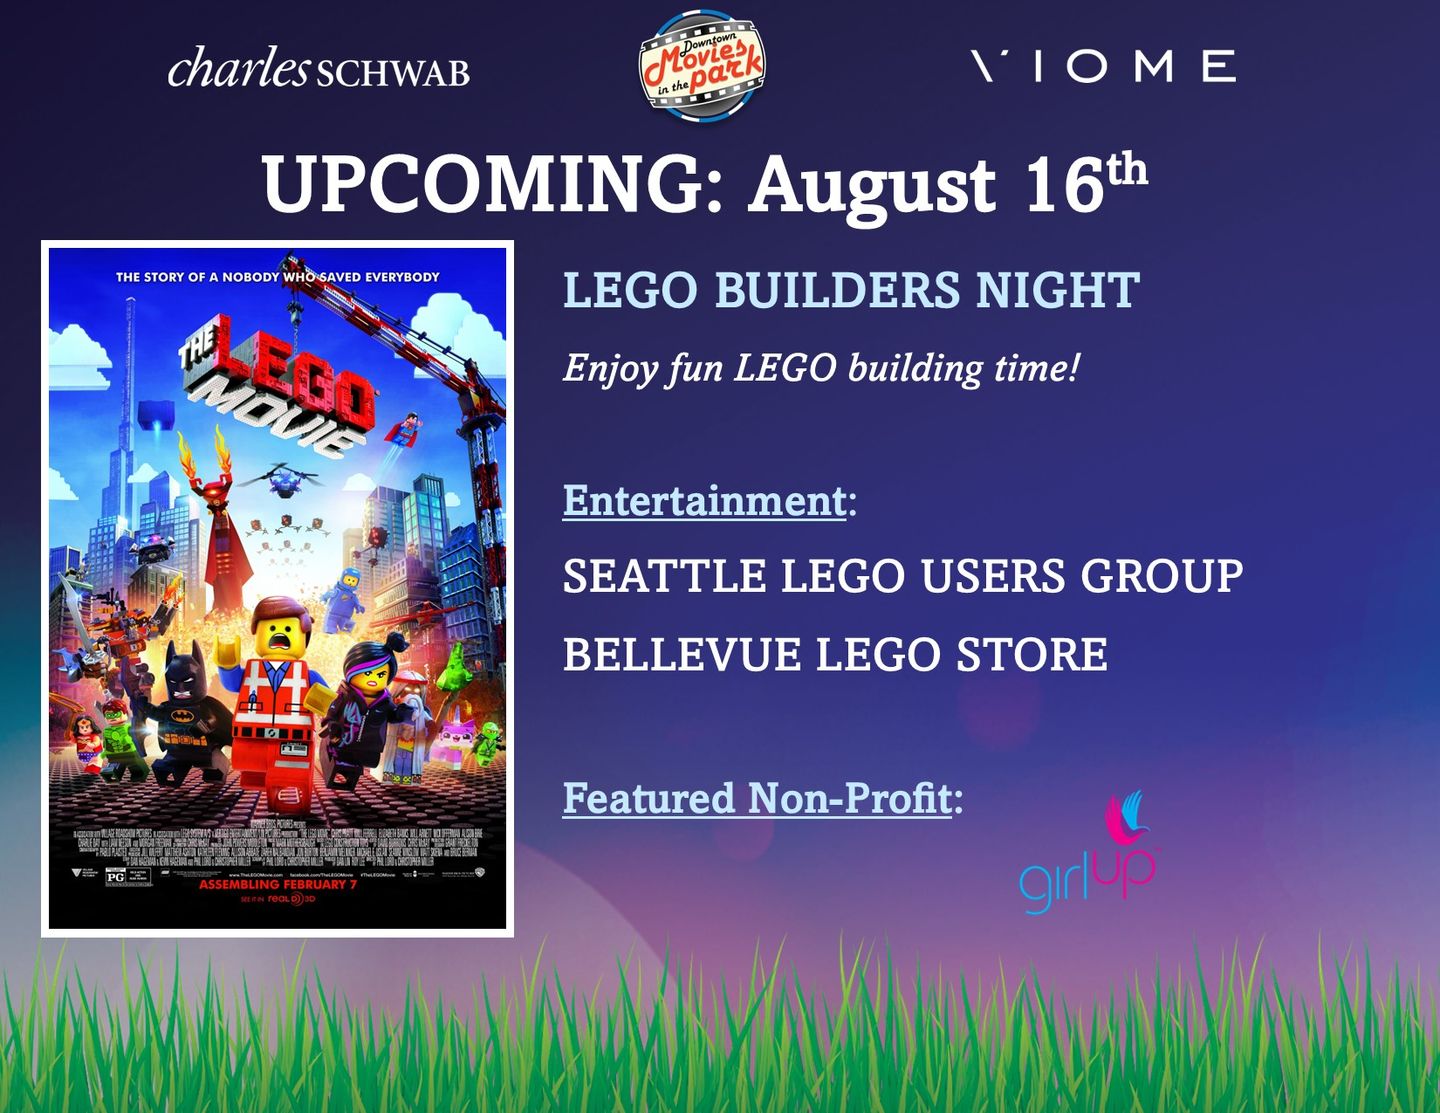 Image of The Lego Movie Poster with details about event on August 16. Text reads: "Upcoming: August 16th lego builders night. Enjoy fun lego building time! Entertainment: Seattle Lego Users Group, Bellevue Lego Store. Featured non-profit: girlup" 